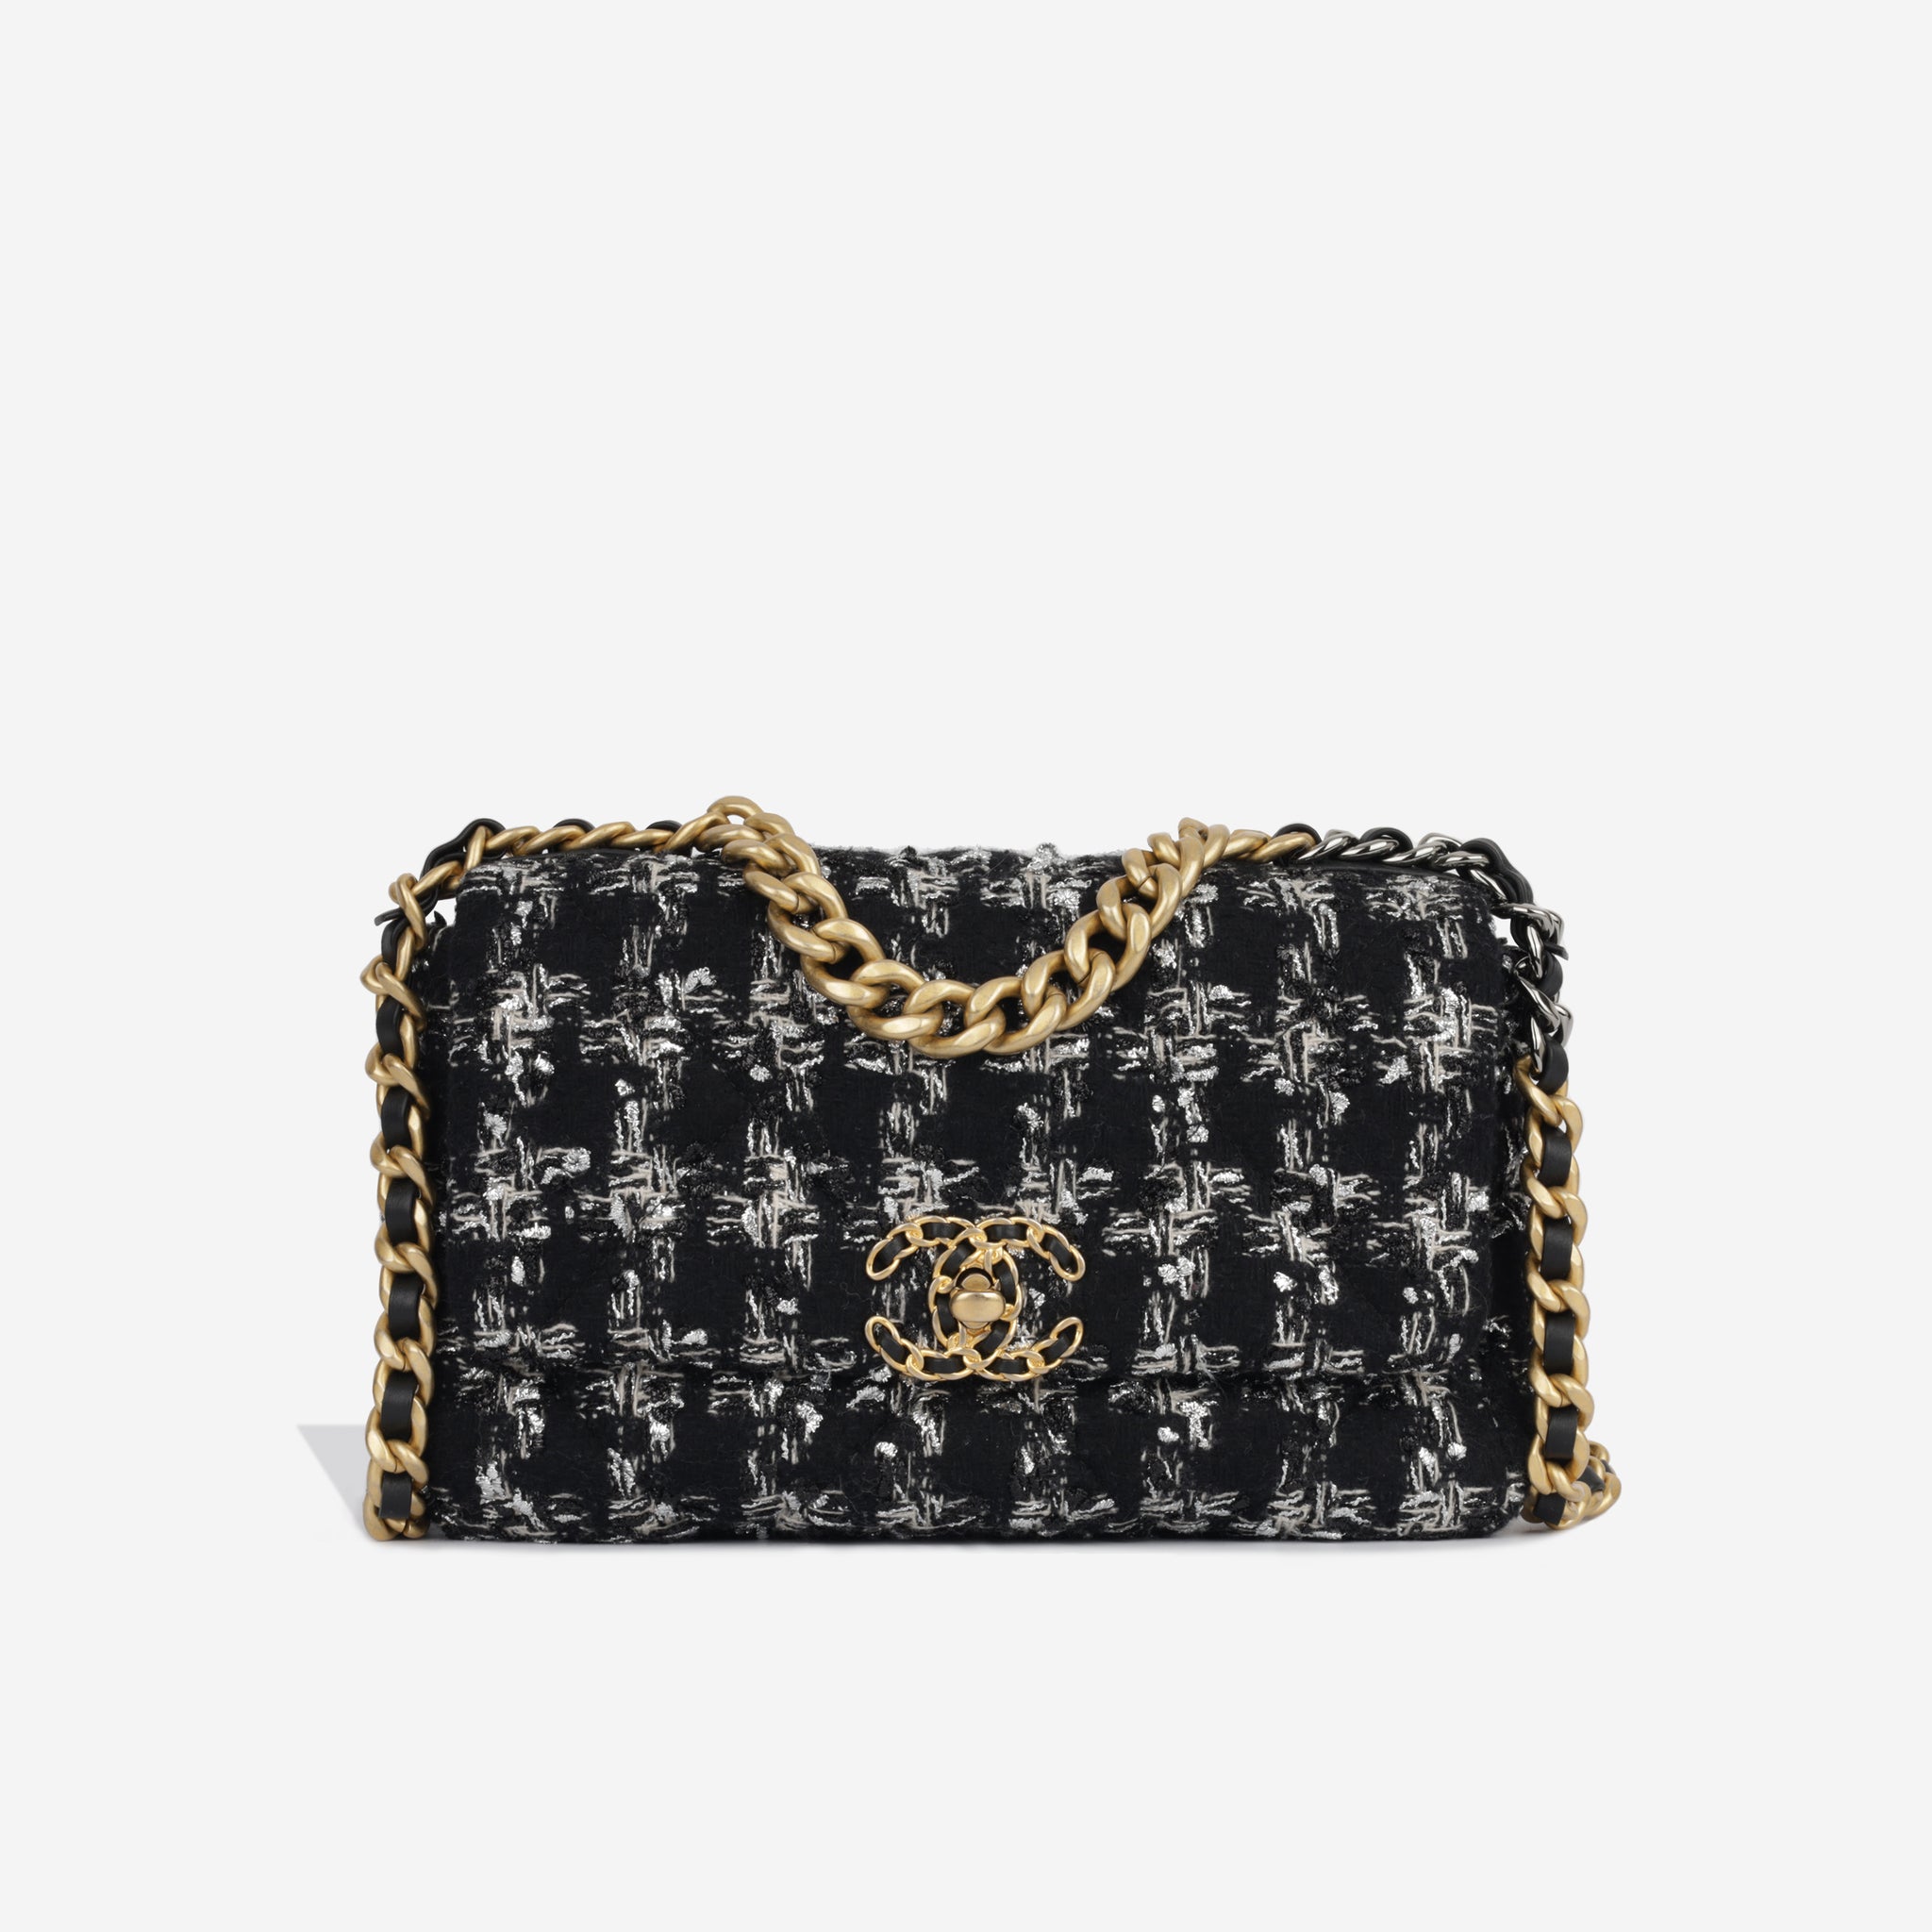 Chanel - Small 19 Flap Bag - Houndstooth Glitter Tweed - MHW - Immaculate